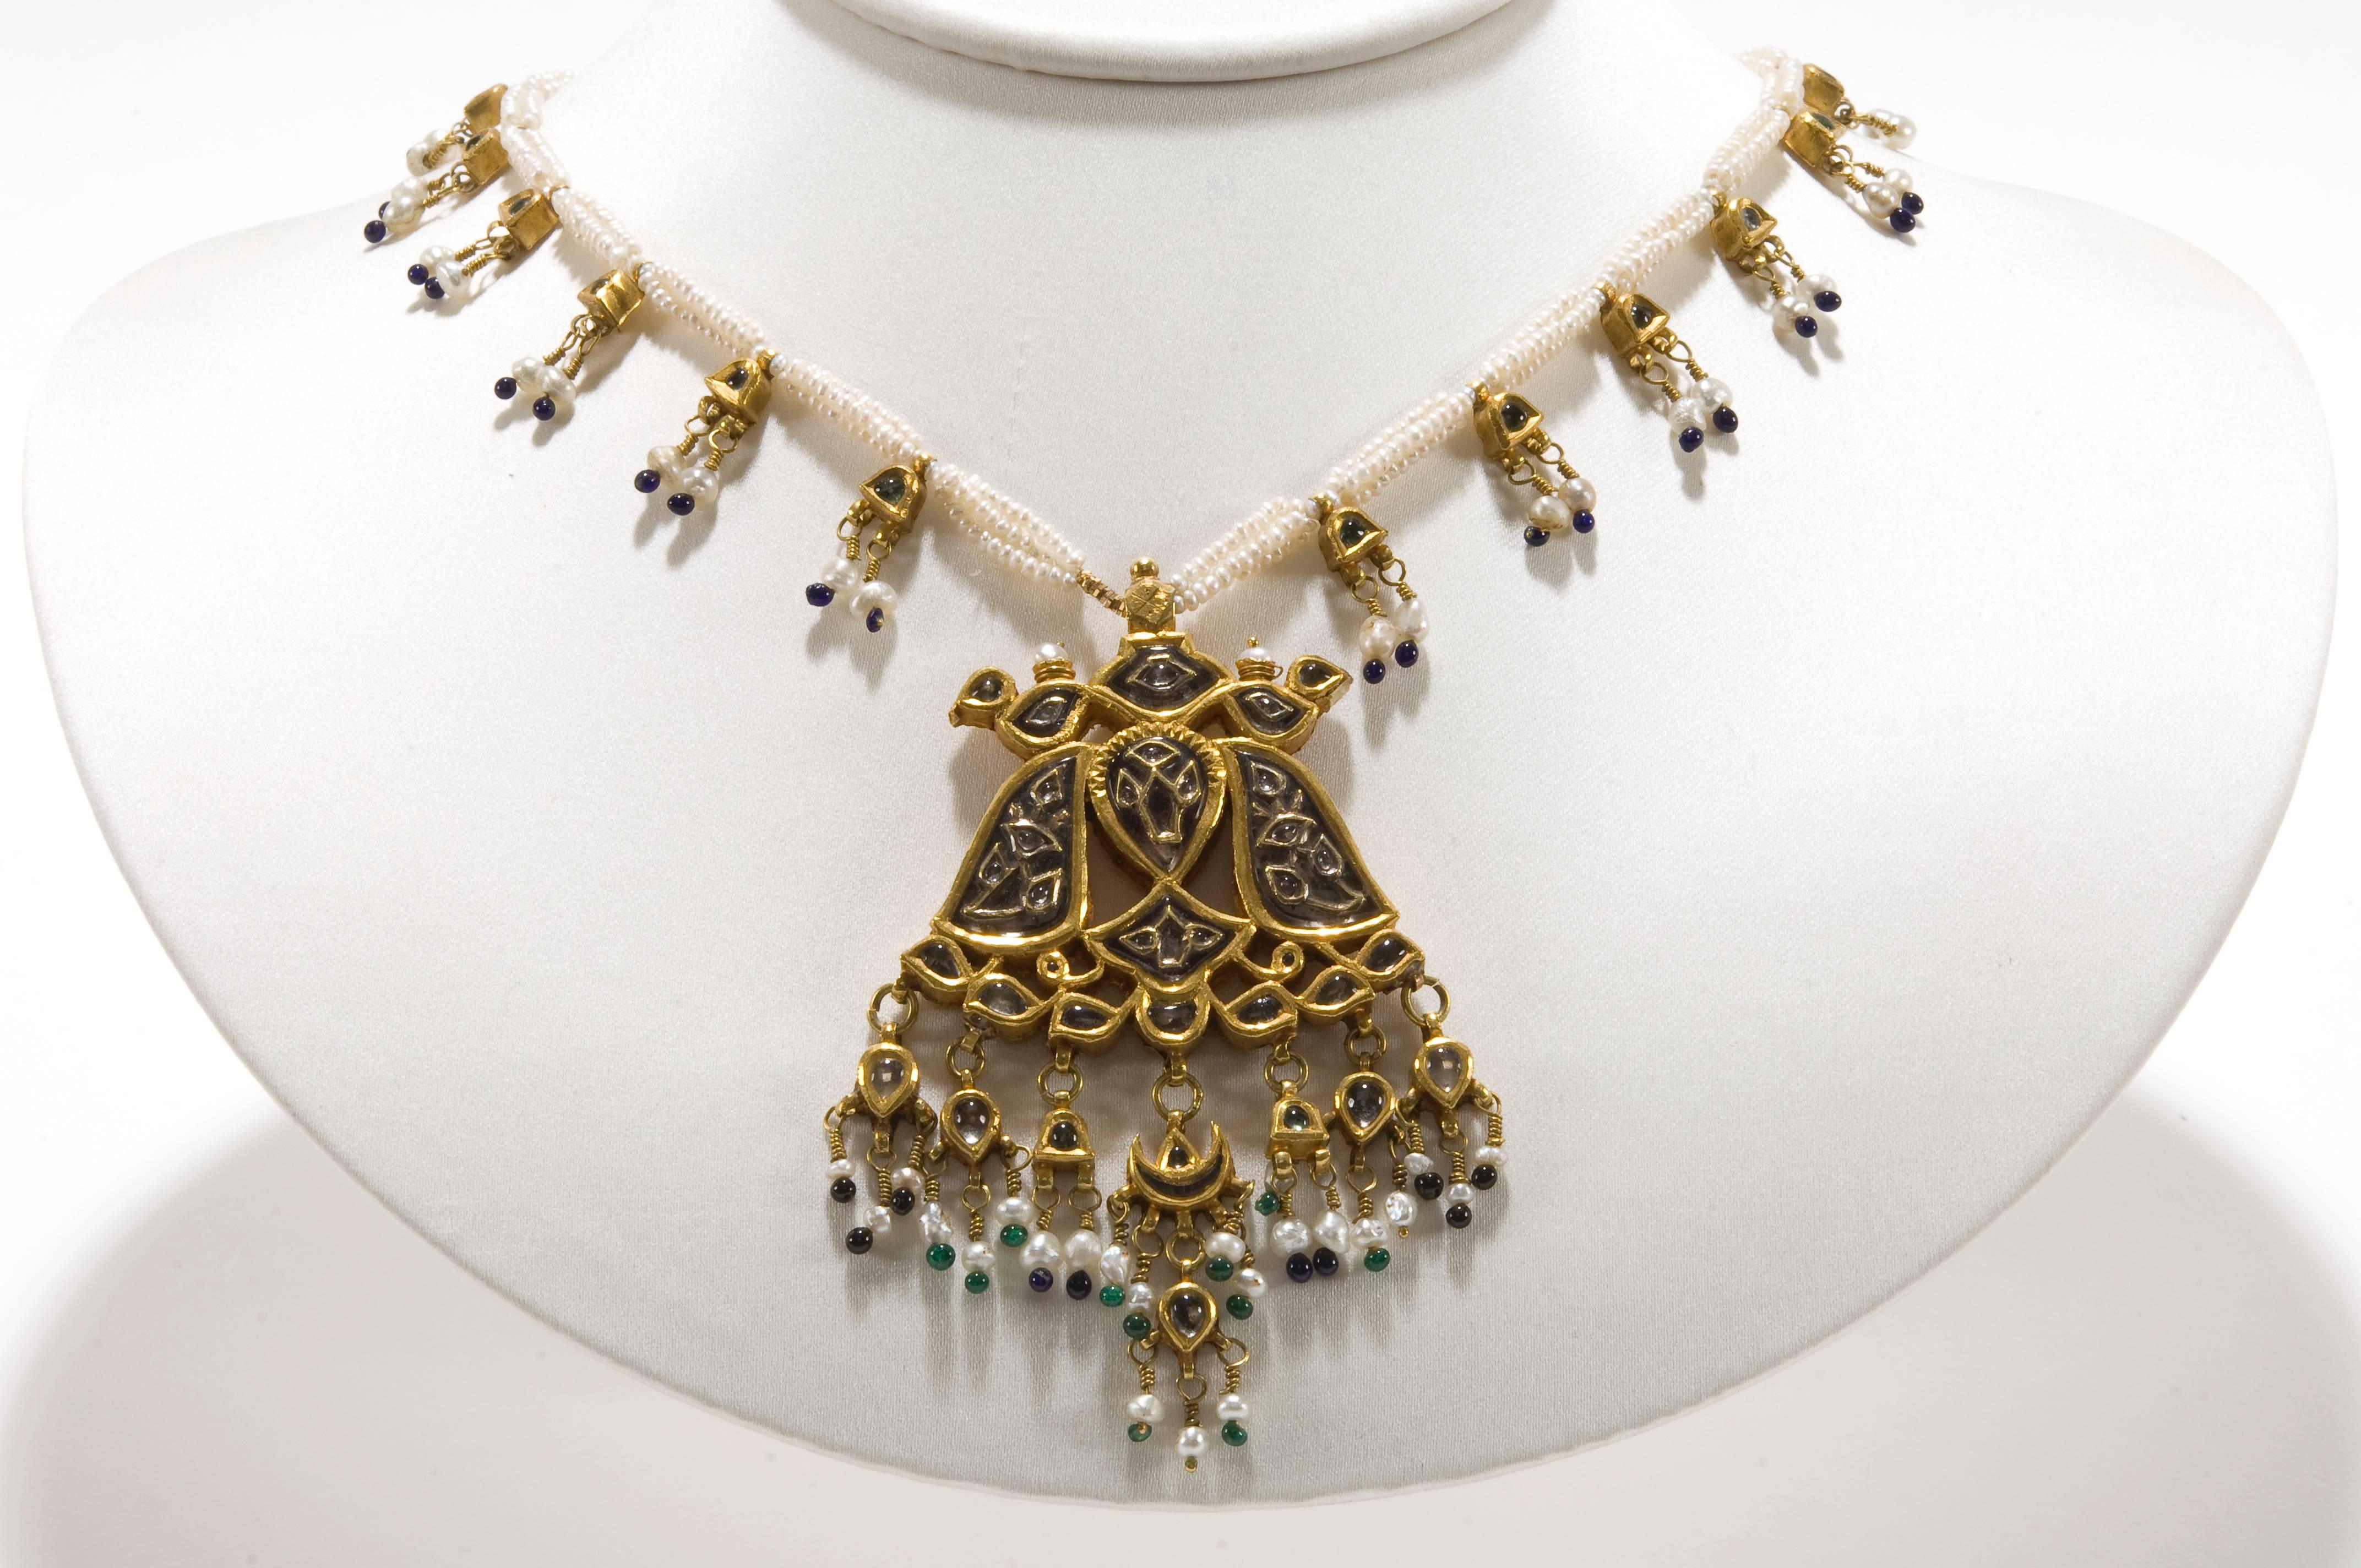 A gold pendant, JUGNI, kundan set with foiled rock crystals, embellishes with carved and gold floral pattern. The reverse of the pendant is decorated with a flower and bird design in embossed sheet gold. The pendant is suspended from three strings